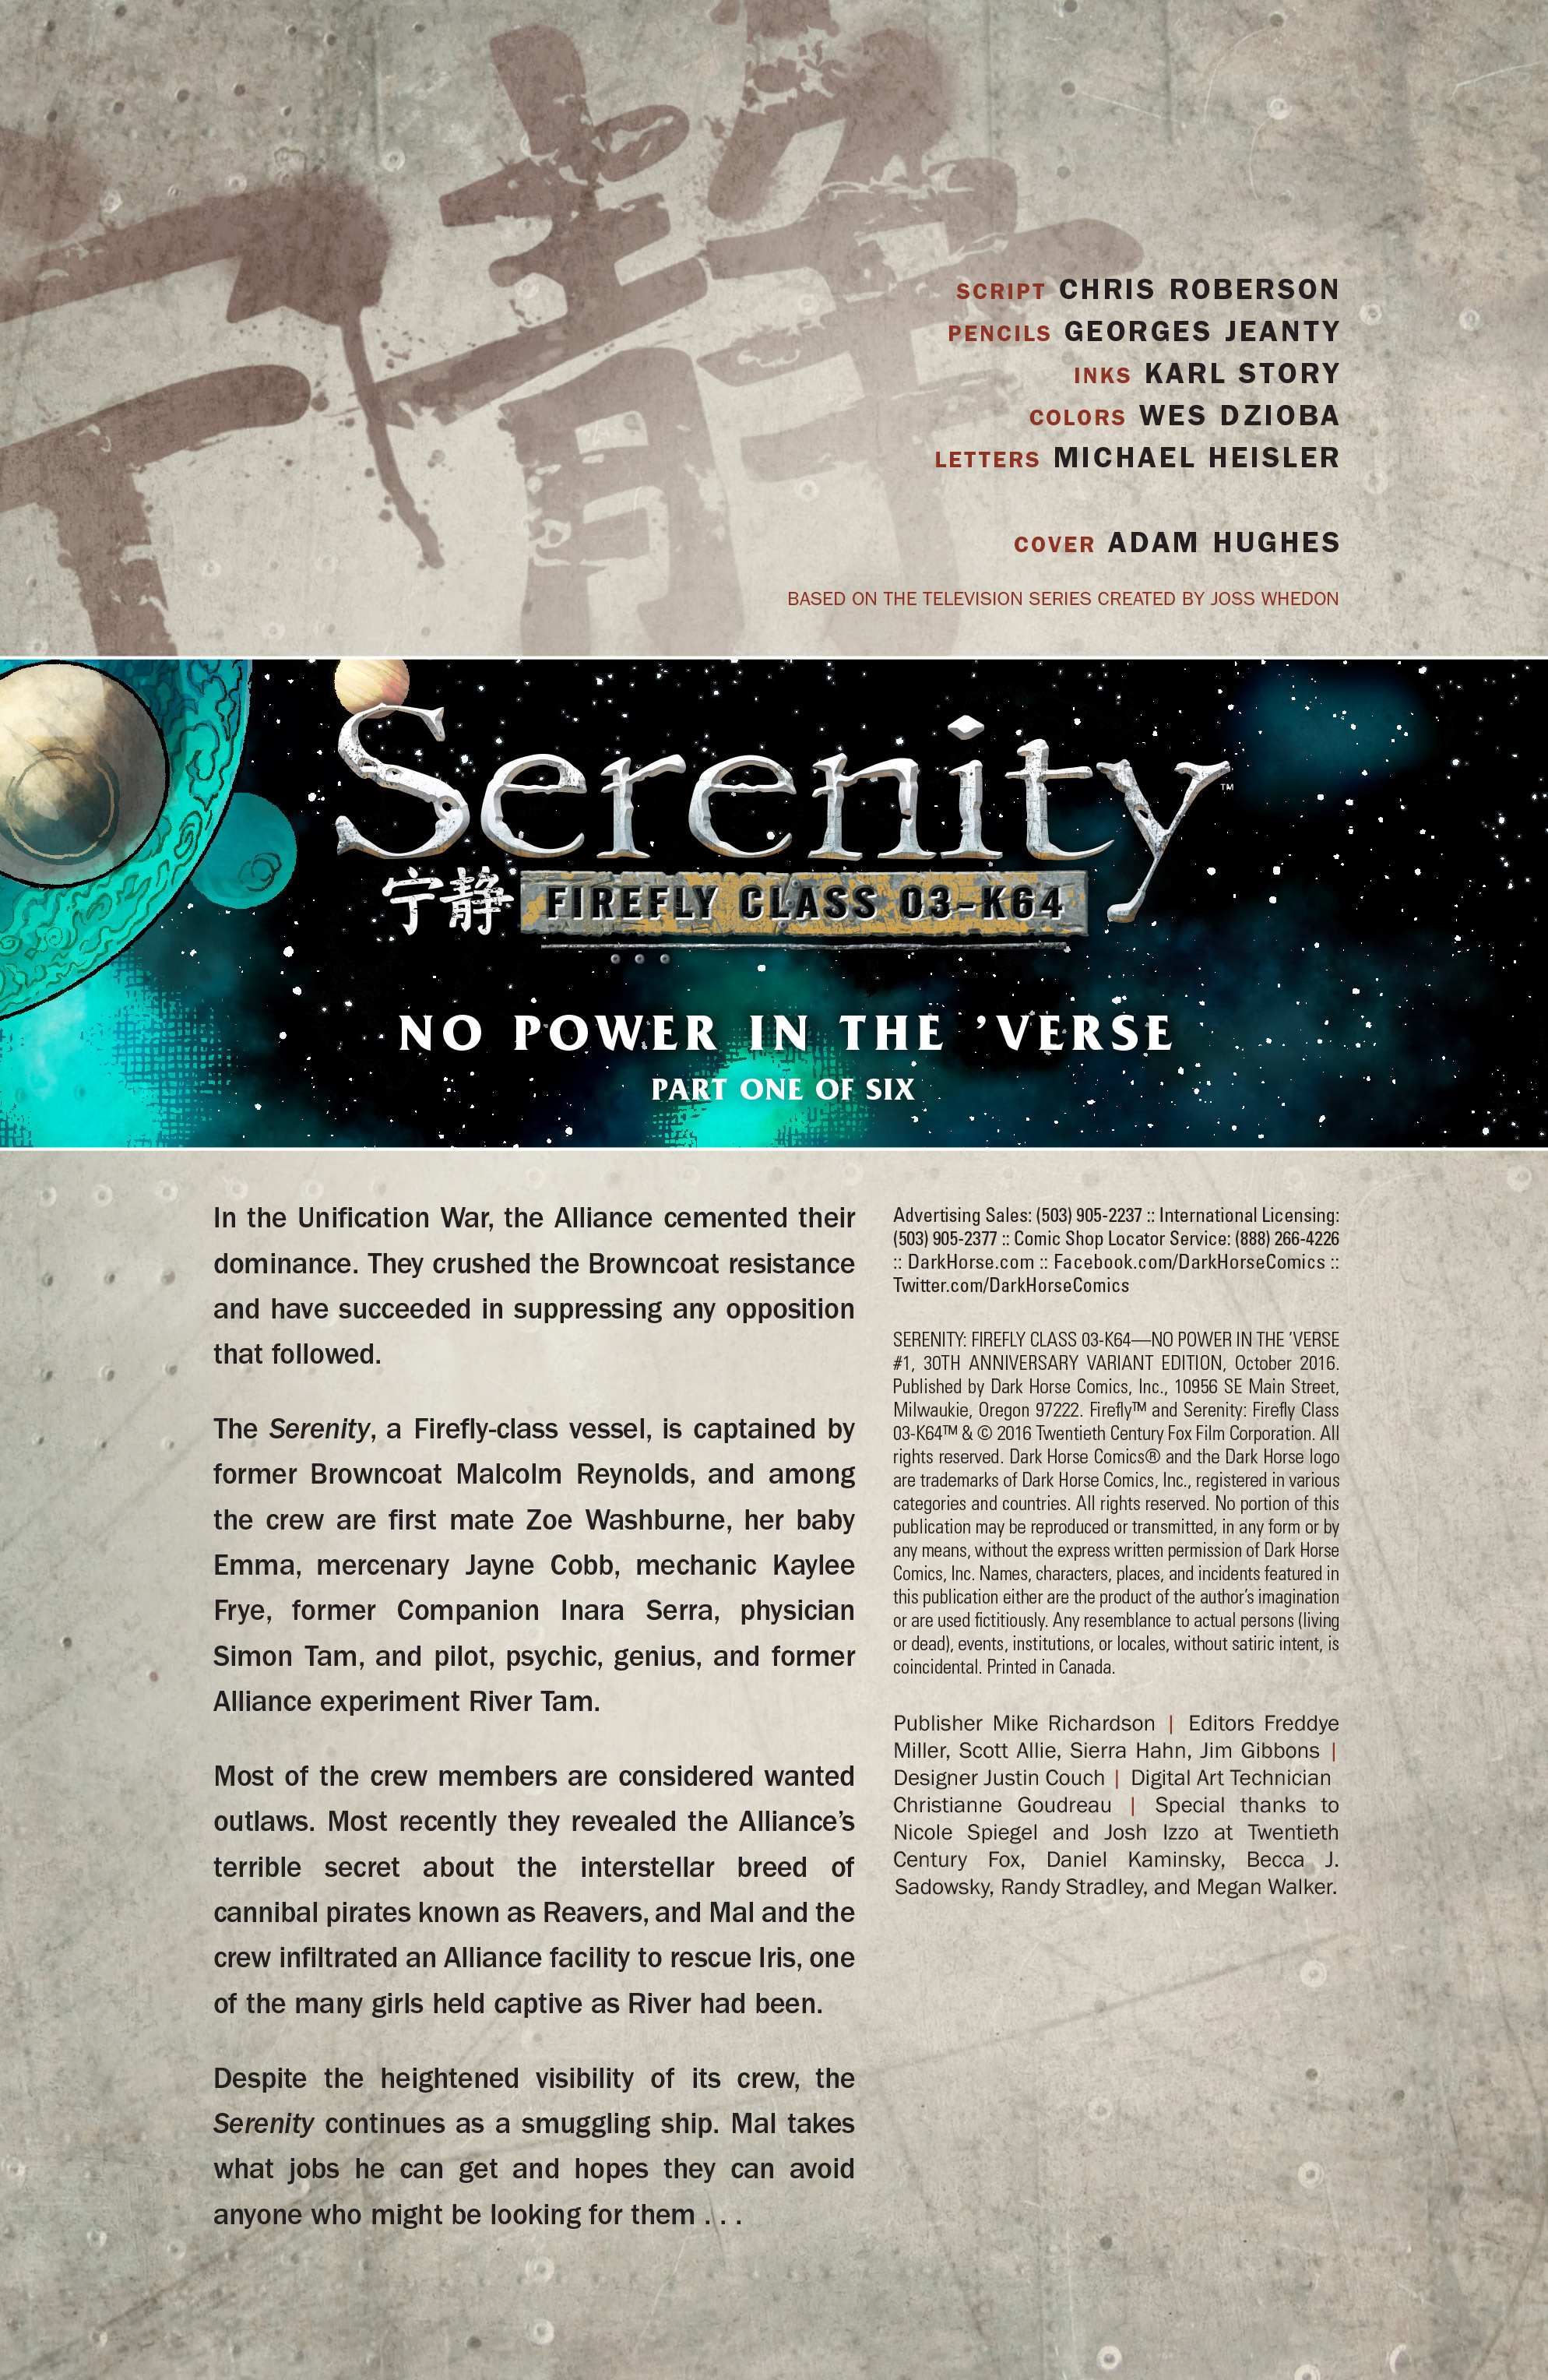 Read online Serenity: Firefly Class 03-K64 – No Power in the 'Verse comic -  Issue #1 - 9